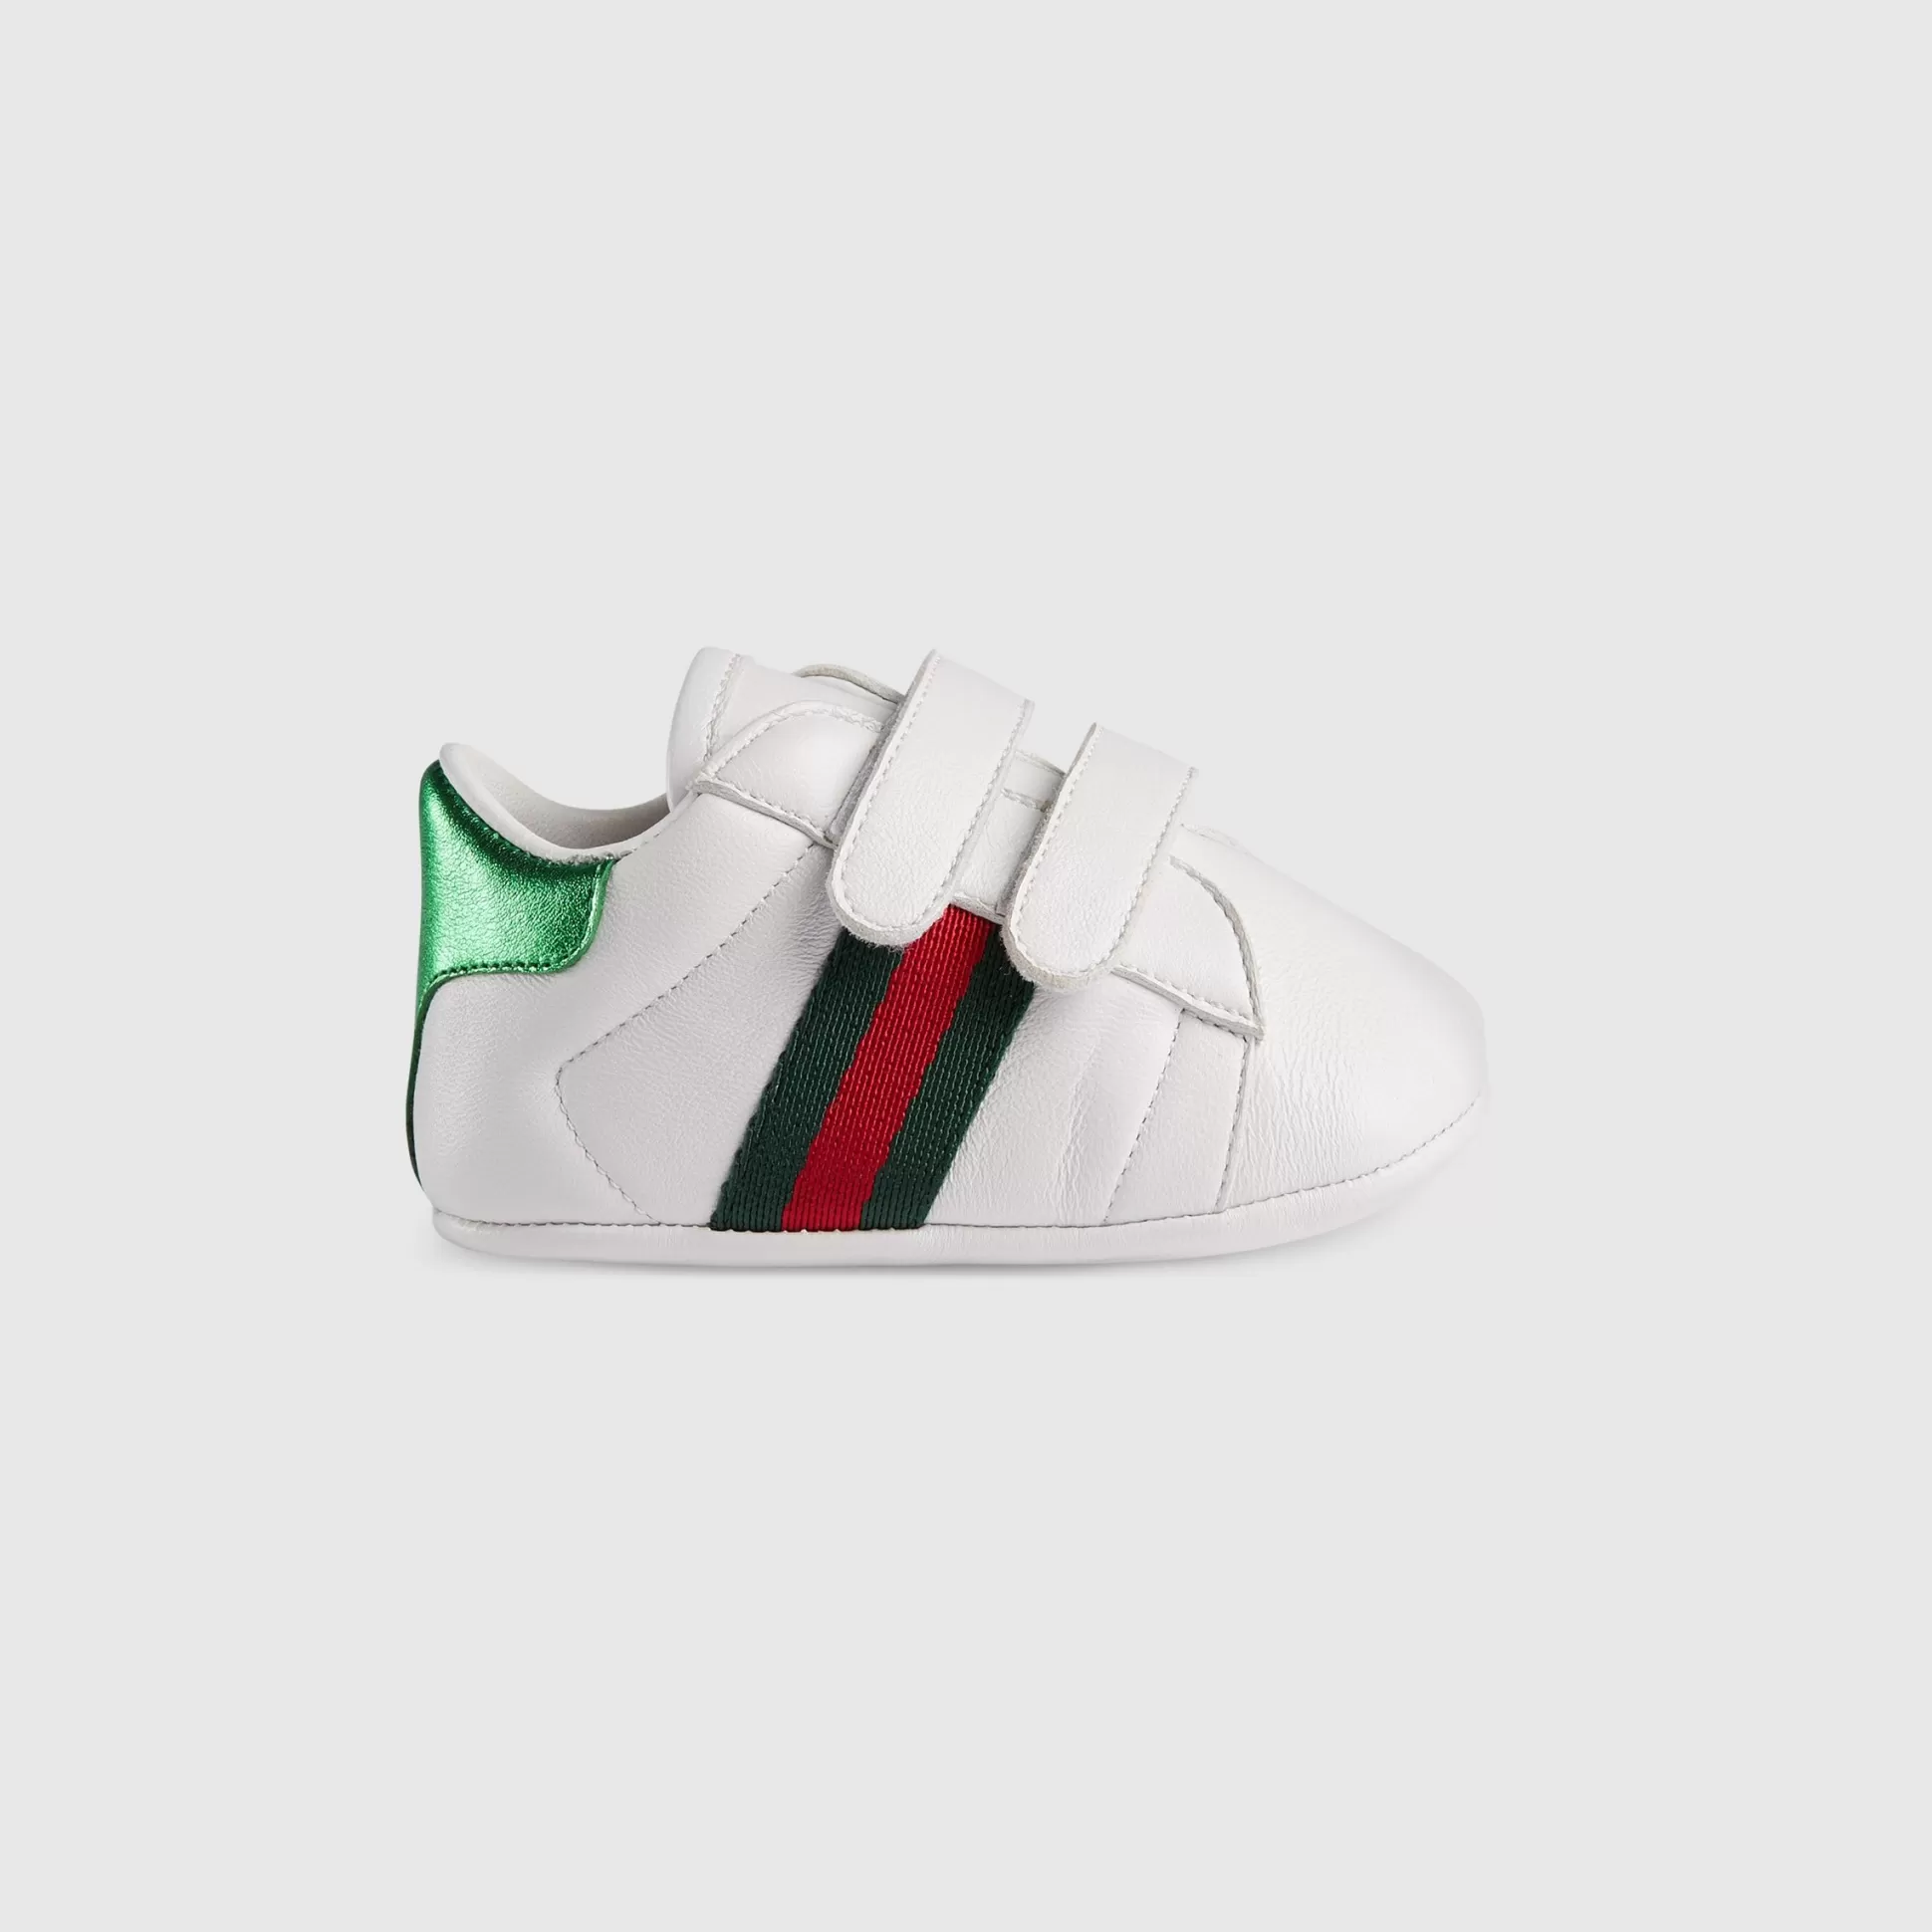 GUCCI Baby Ace Leather Sneaker-Children Baby Shoes (16-19)